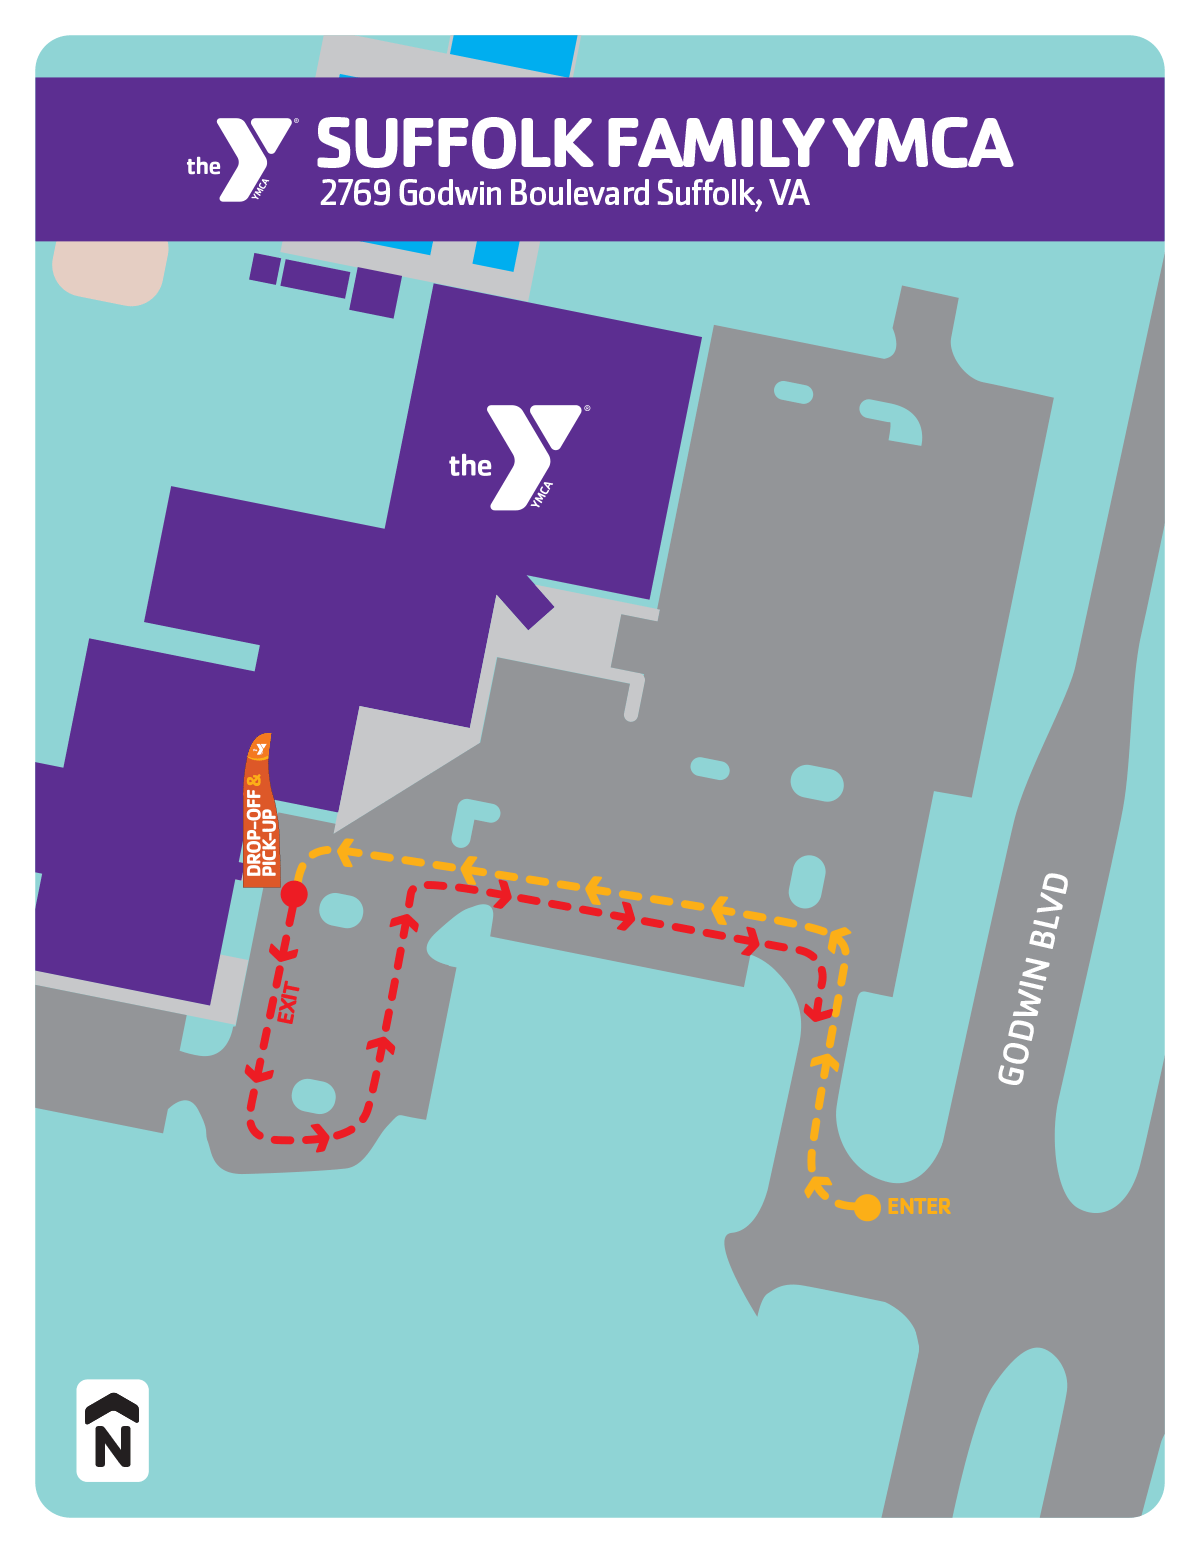 Summer camp drop-off & pick-up locations for the Suffolk Family YMCA